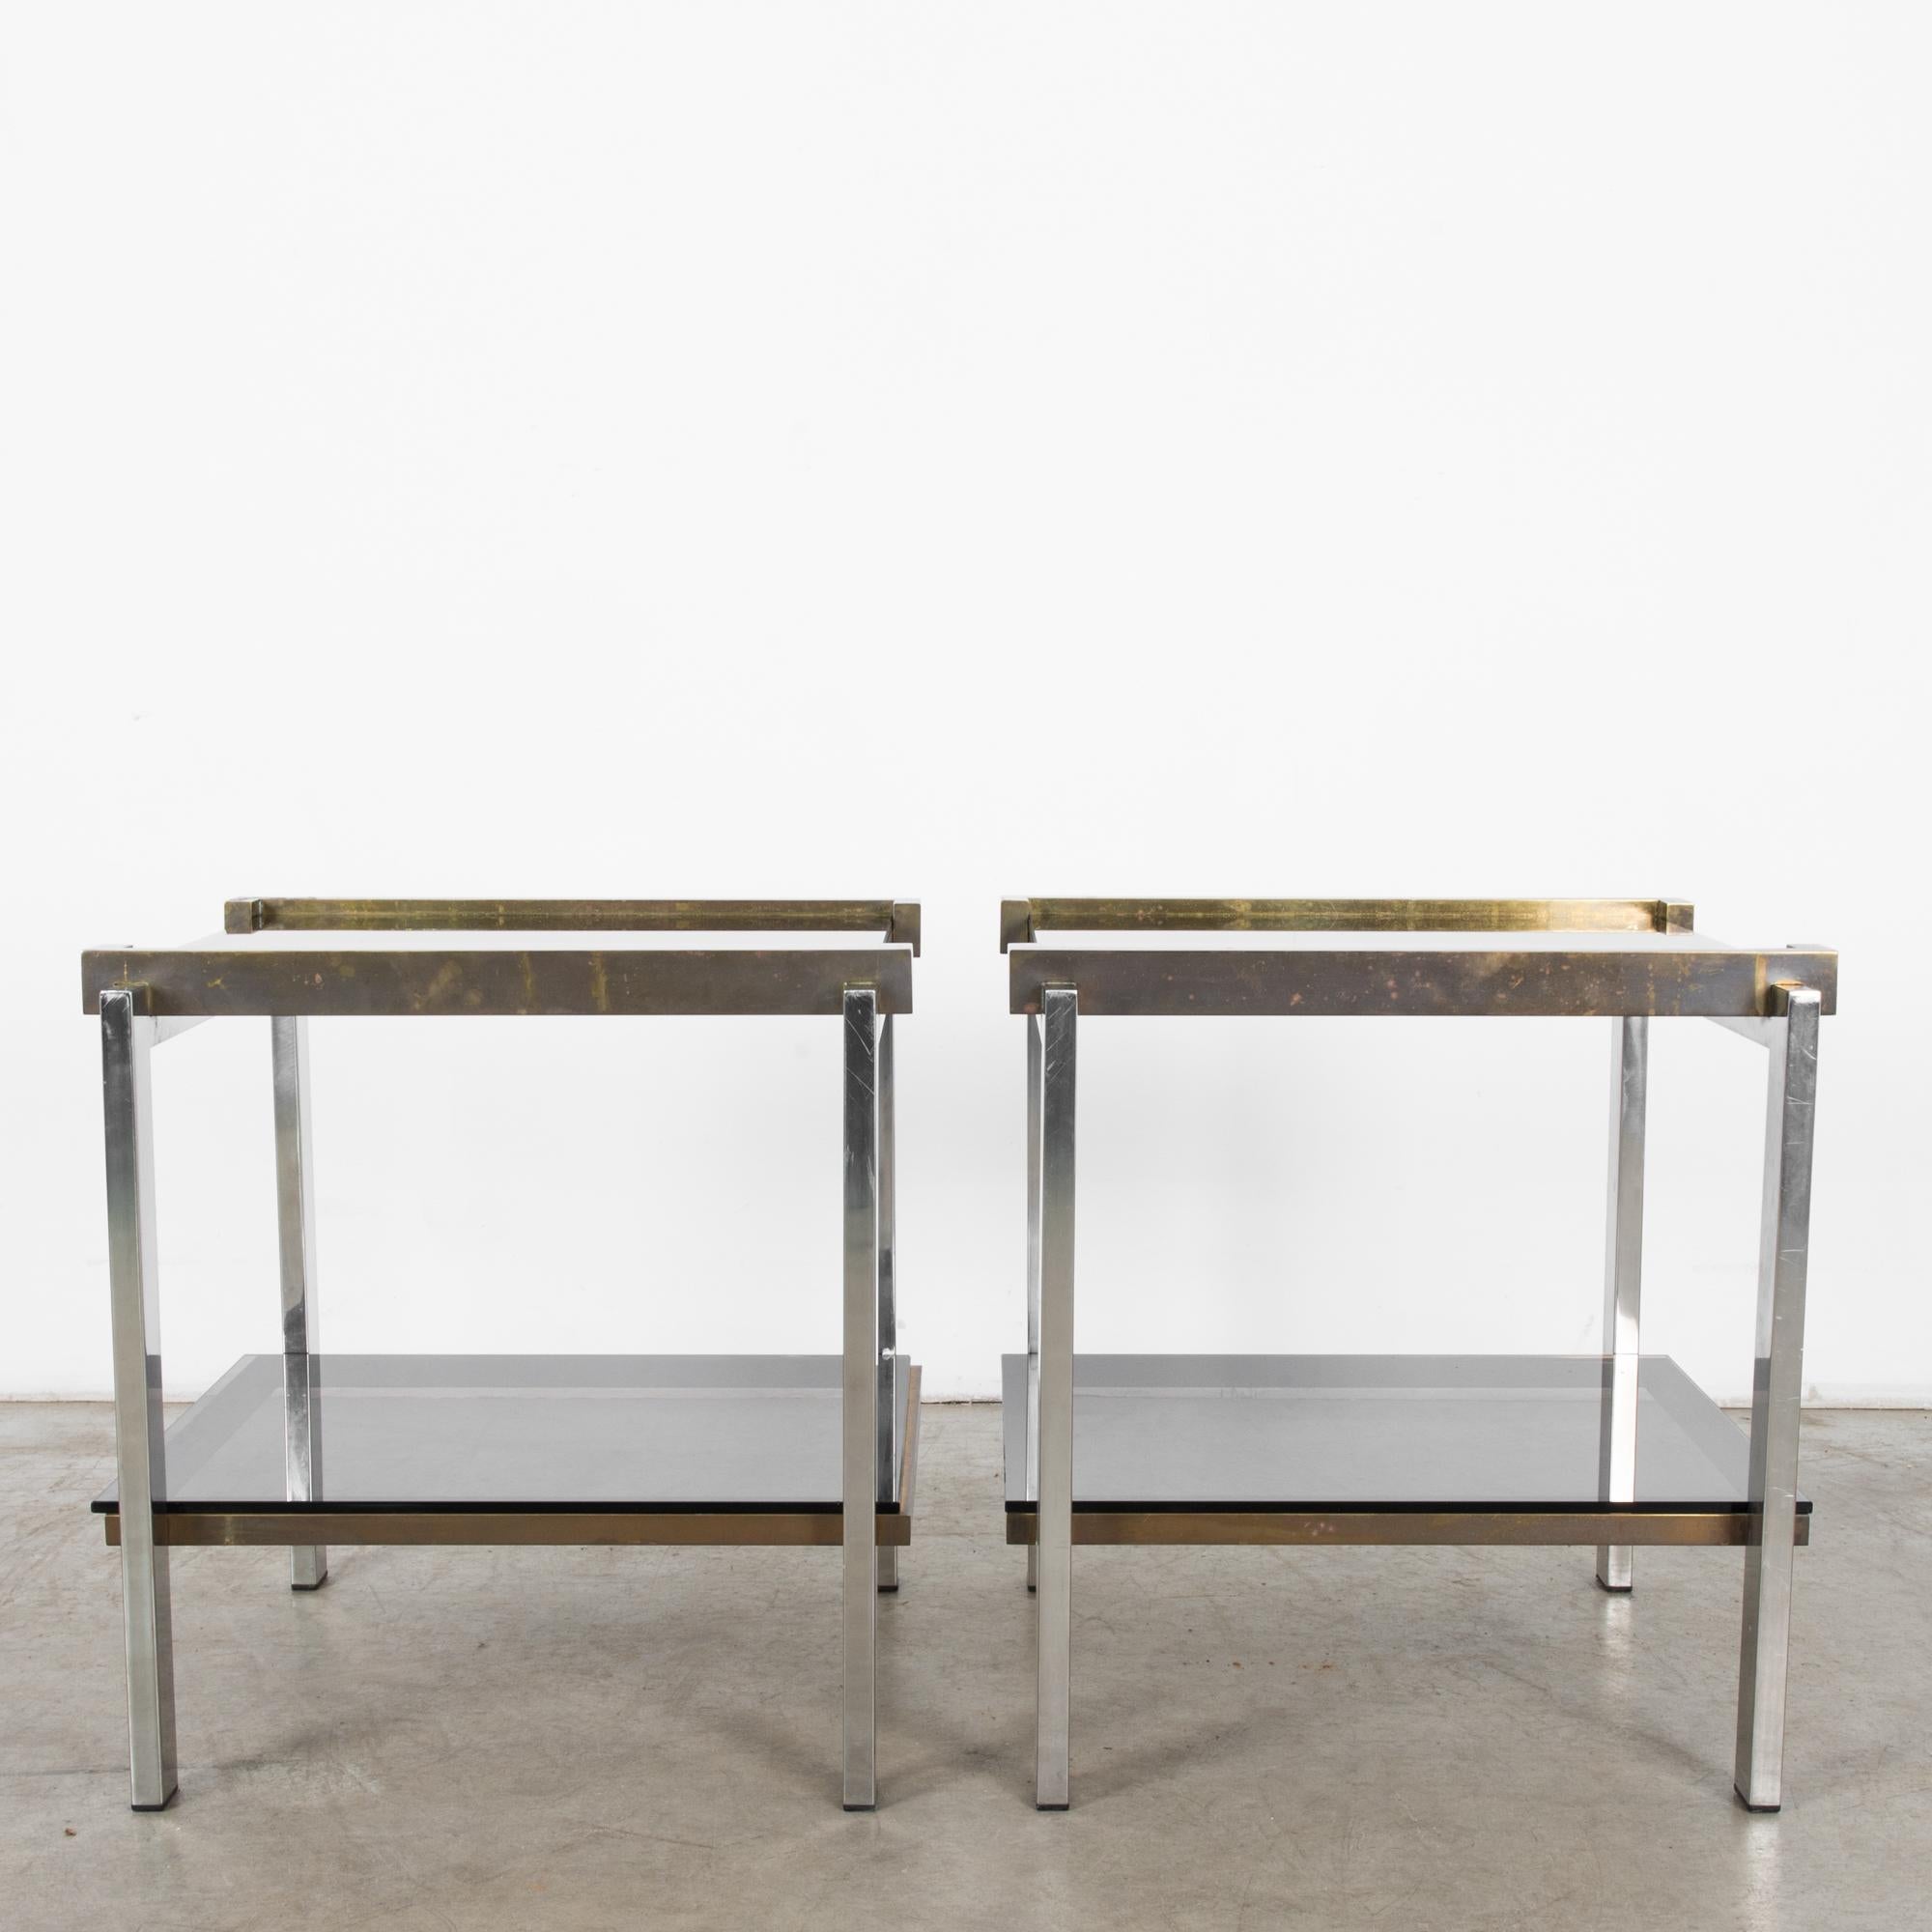 A pair of glass topped metal side tables from France, circa 1970. Their tinted glass tops seem to float atop gleaming chrome legs in oxidized brackets. Chic and commanding presence in clean geometric outline, this decidedly modern pair carries